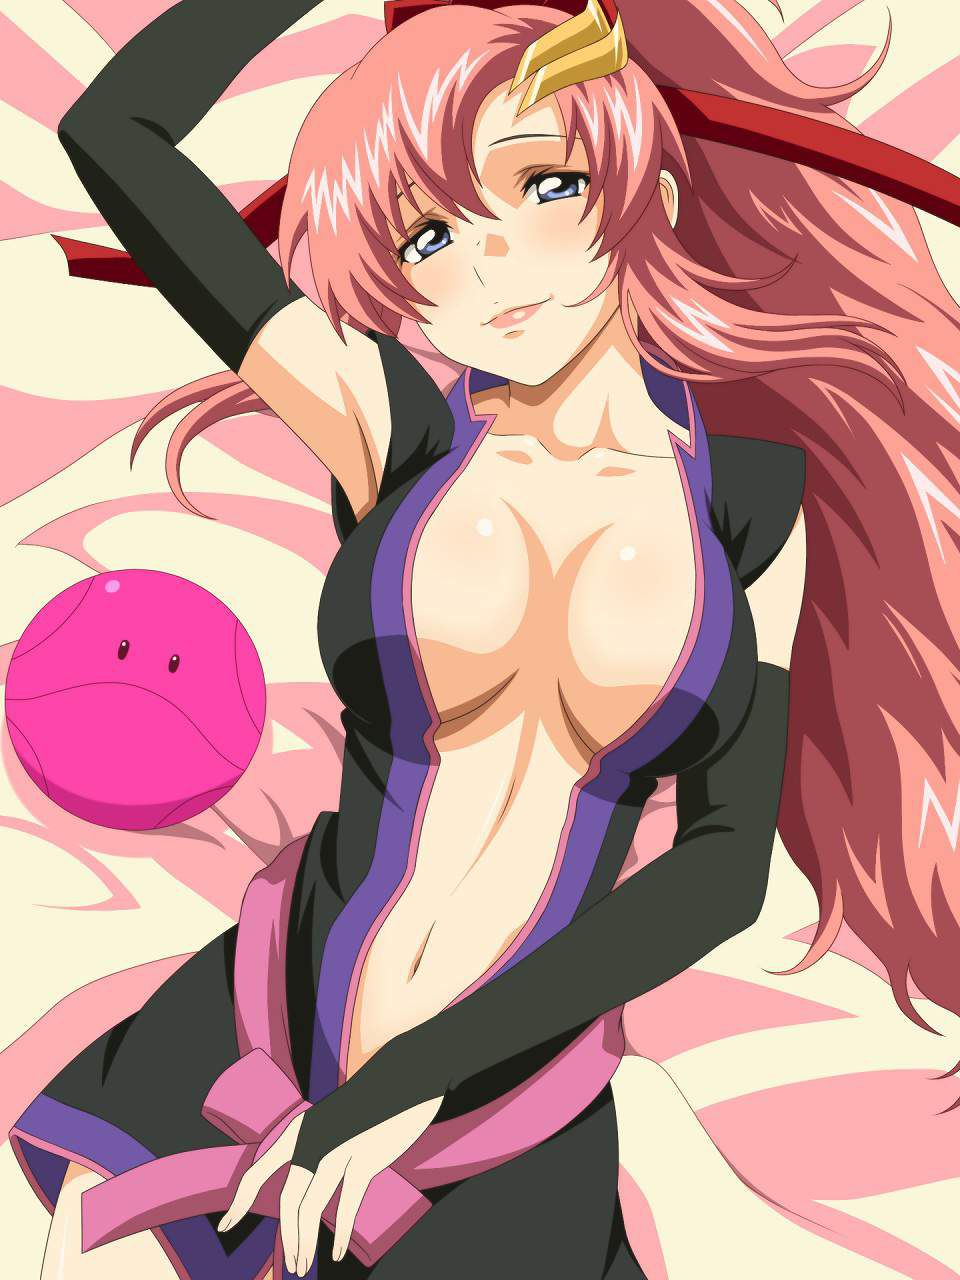 and obscene images of Mobile Suit Gundam SEED! 2